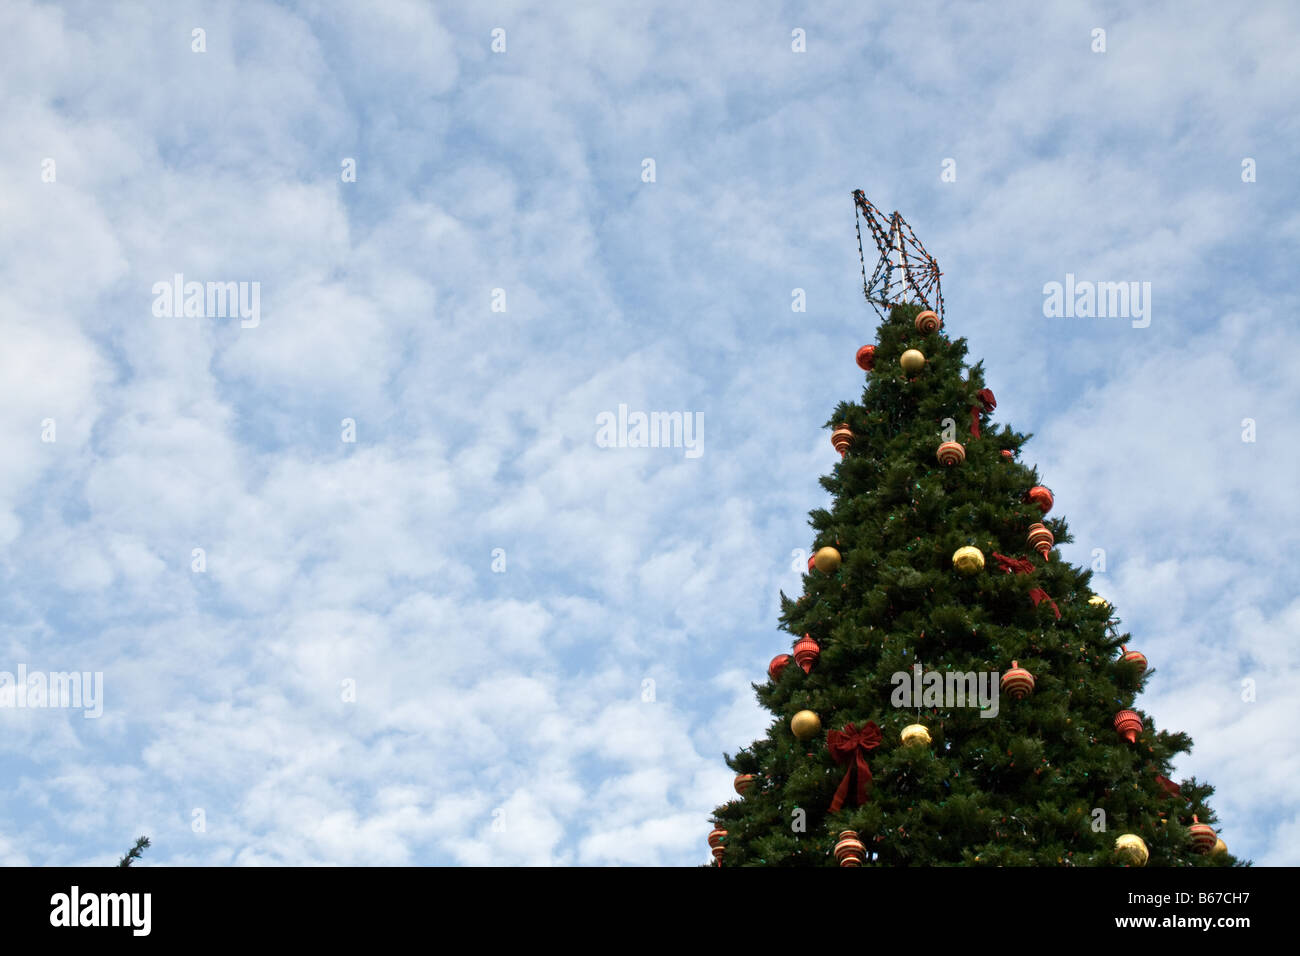 Top of a Christmas tree with a large star ornament on the top outdoors Stock Photo